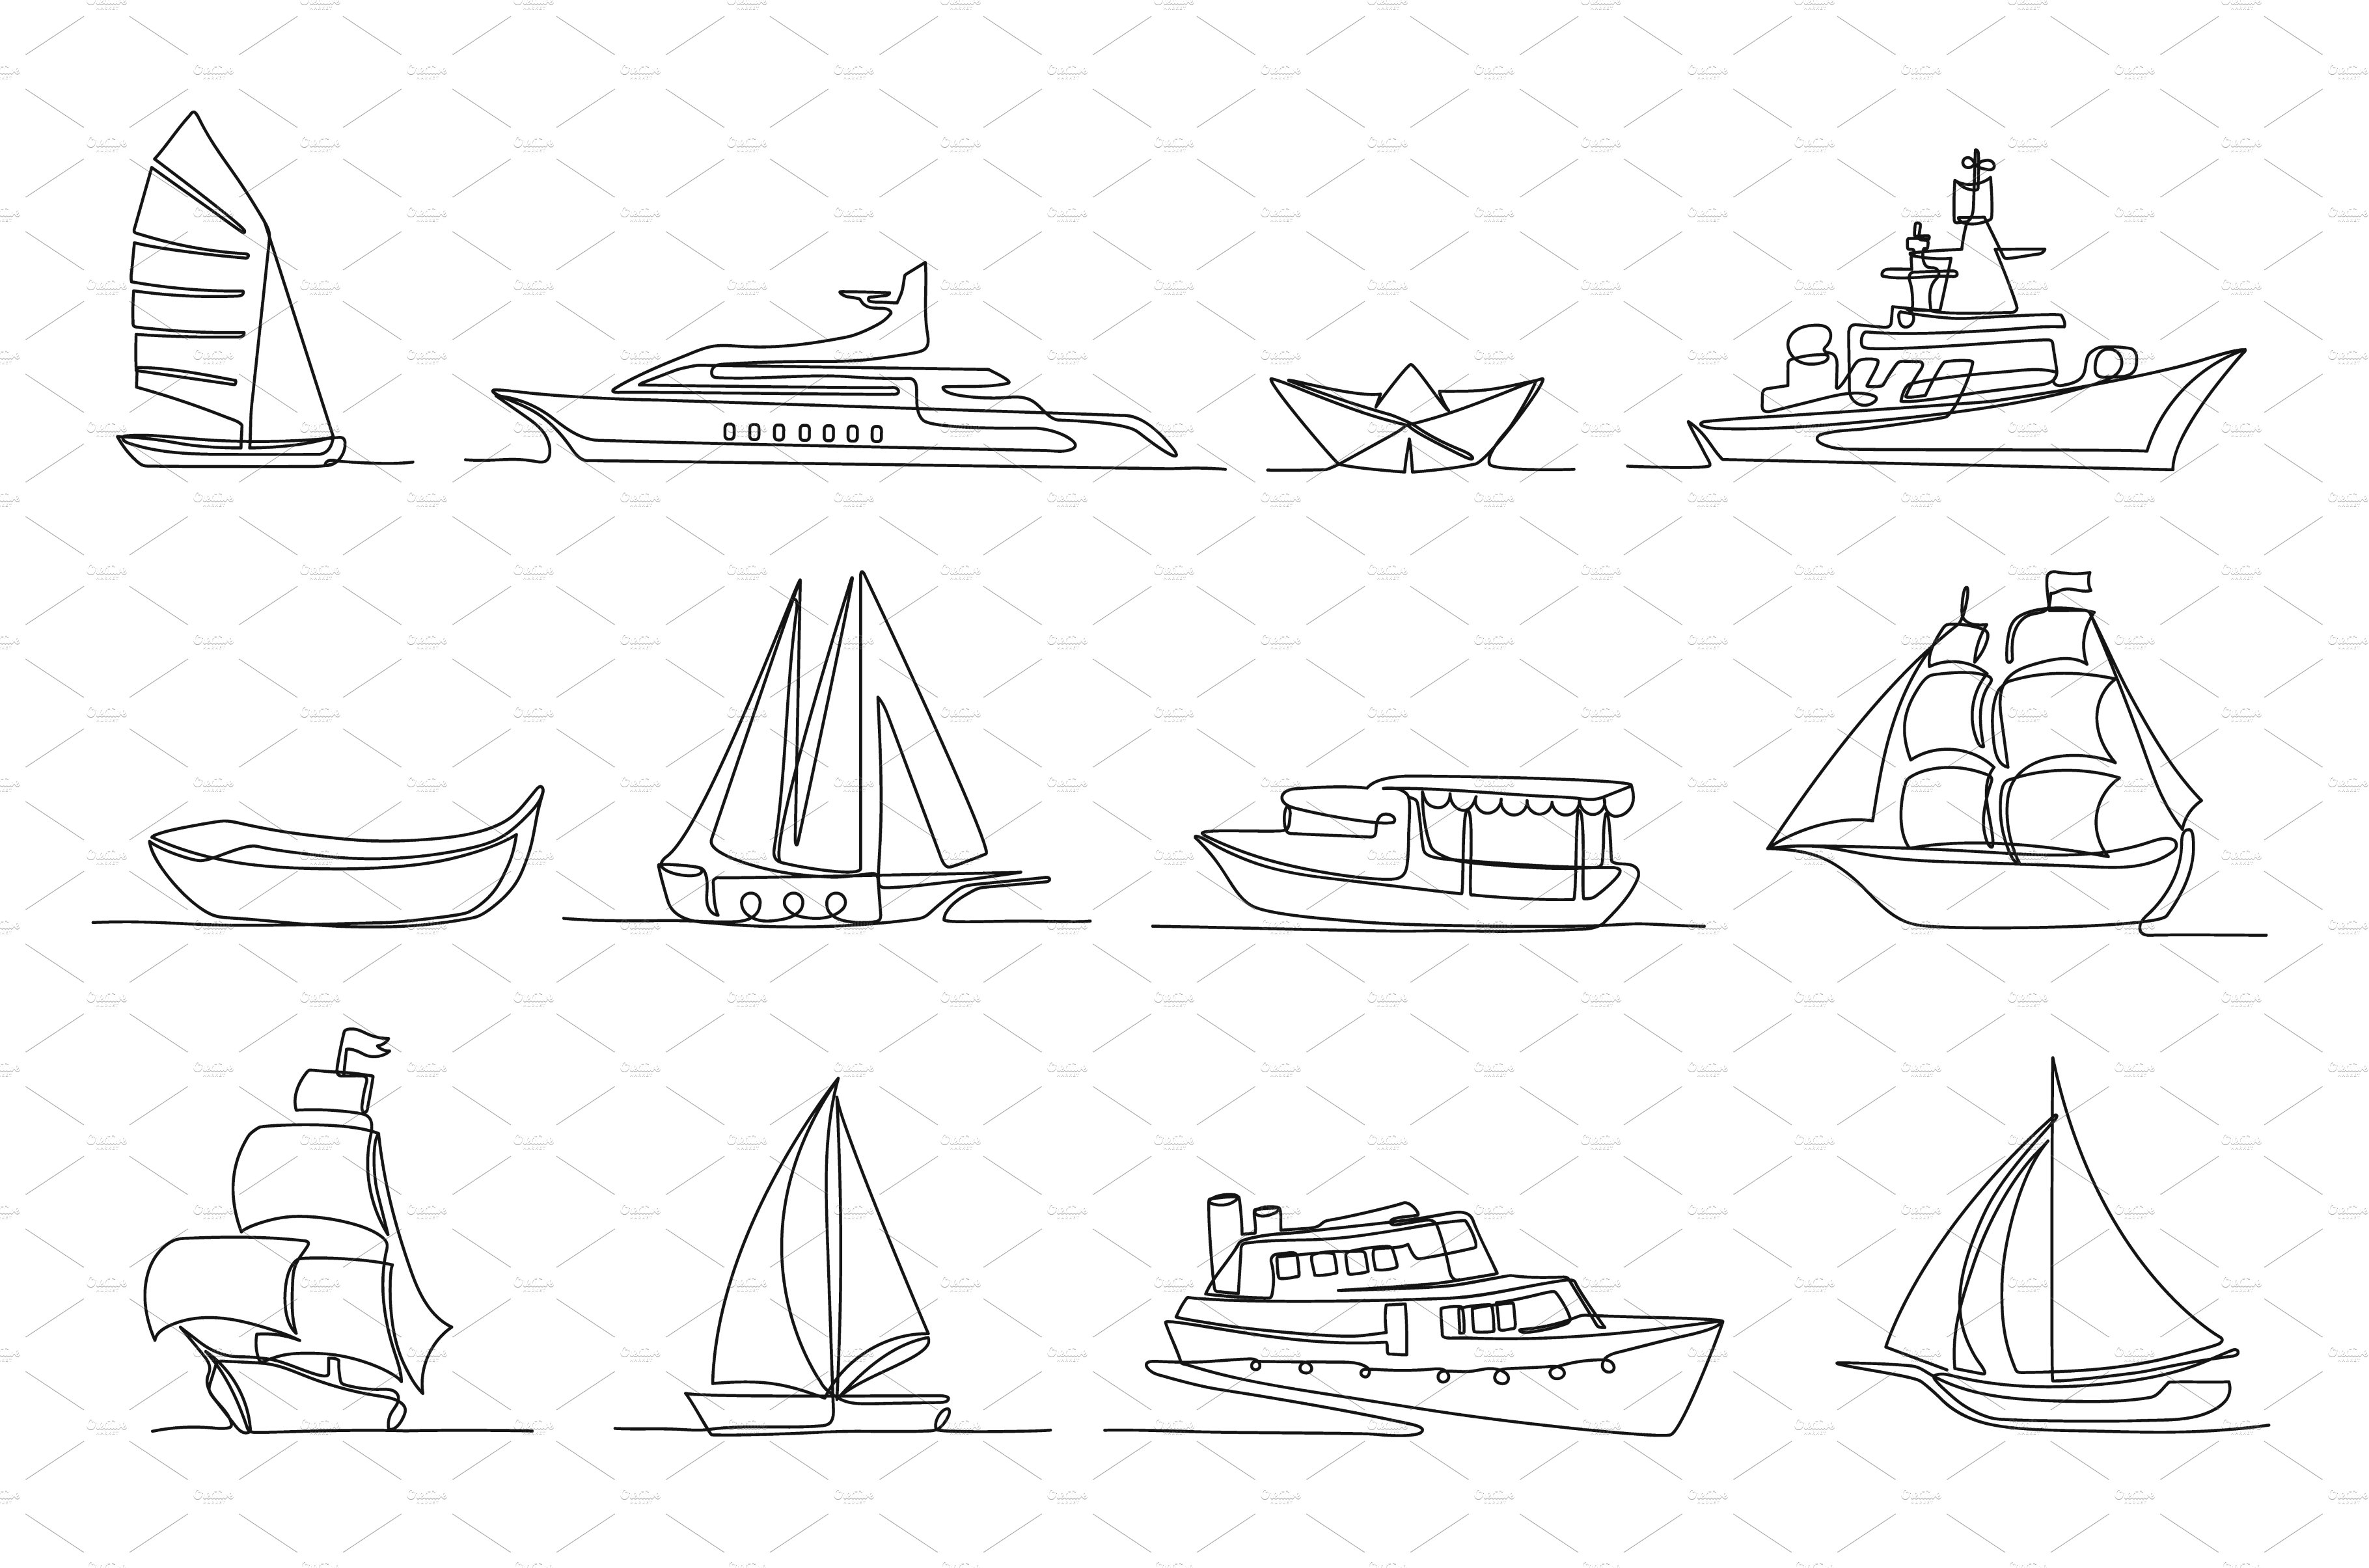 One continuous line boats. Sailboat cover image.